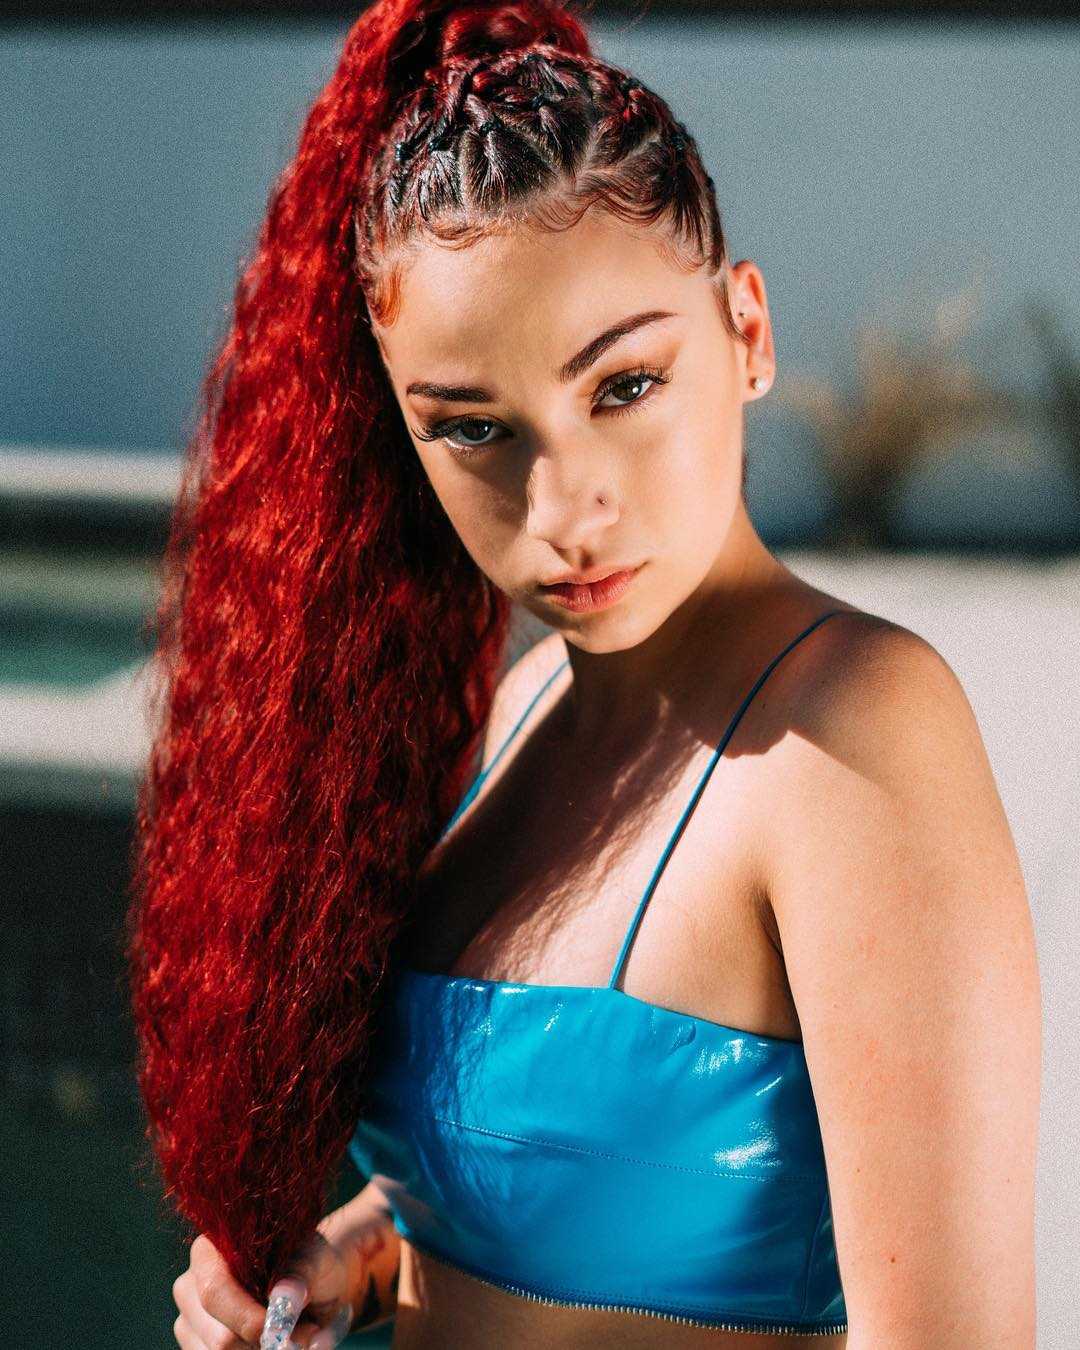 70+ Hot Pictures Of Danielle Bregoli aka Bhad Bhabie Which Will Win Your Heart 54